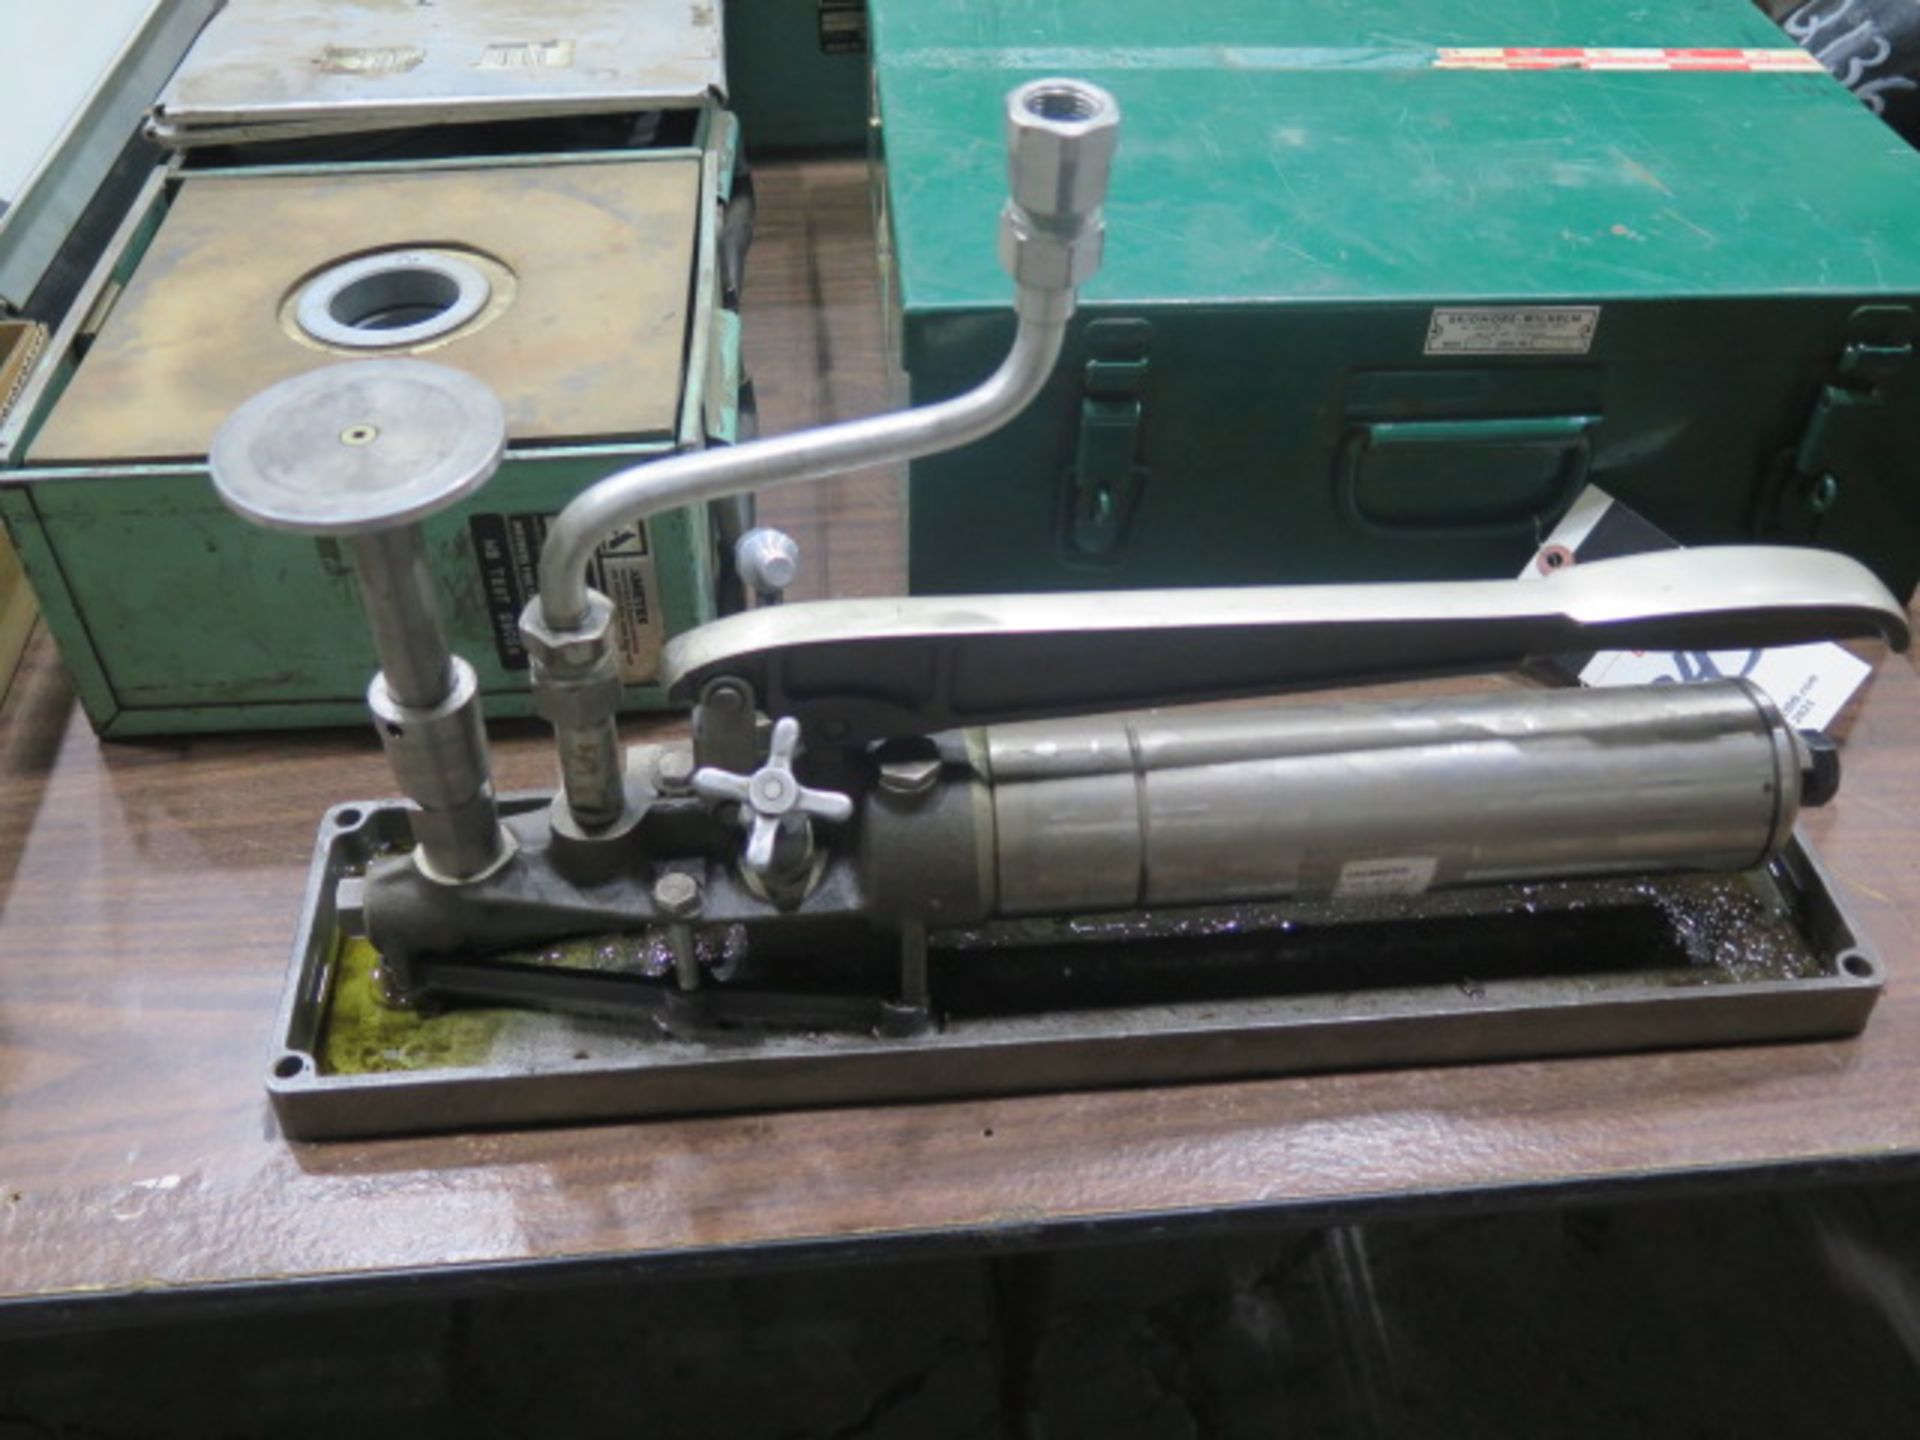 Mansfield & Green Dead Weight Tester and Skidmore Wilhelm mdl. HS-100 Bolt Tension Calibrator - Image 2 of 6